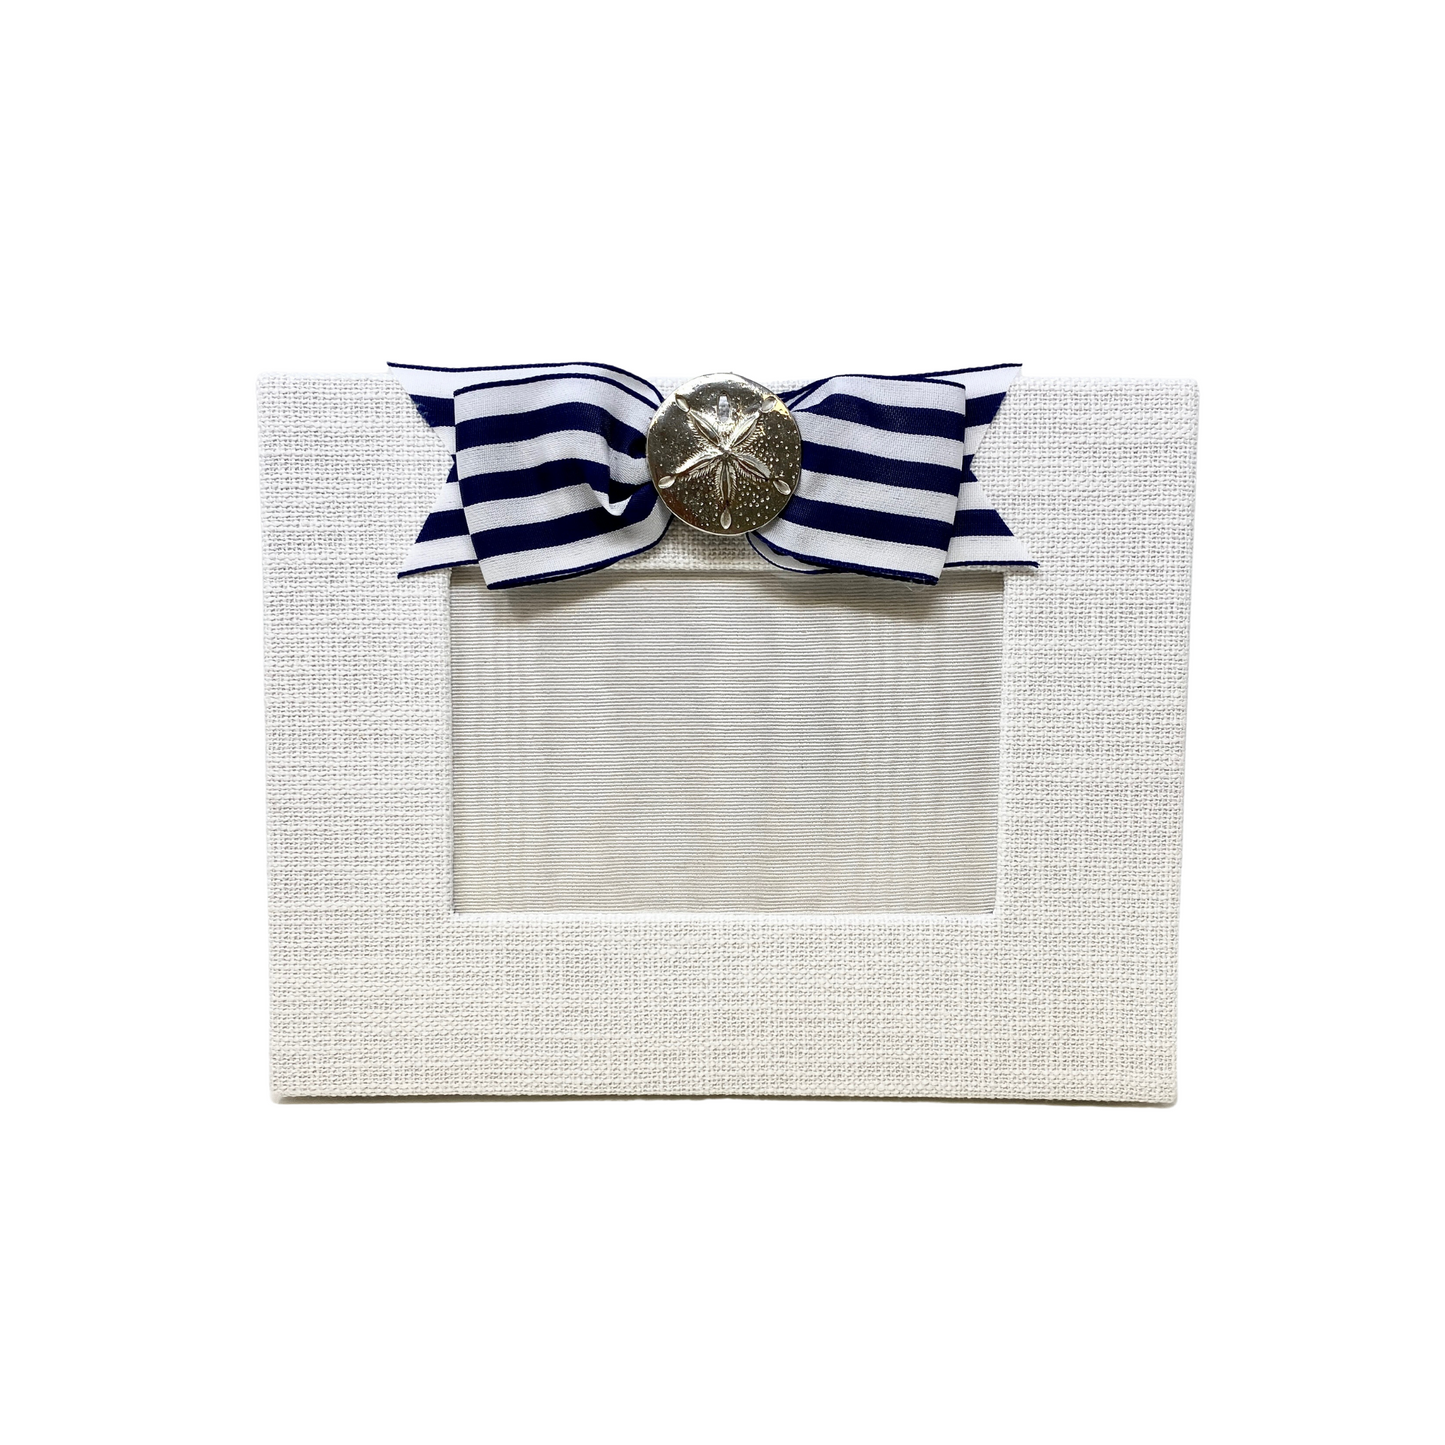 Picture Frame with Blue Stripe Bow and Sand Dollar